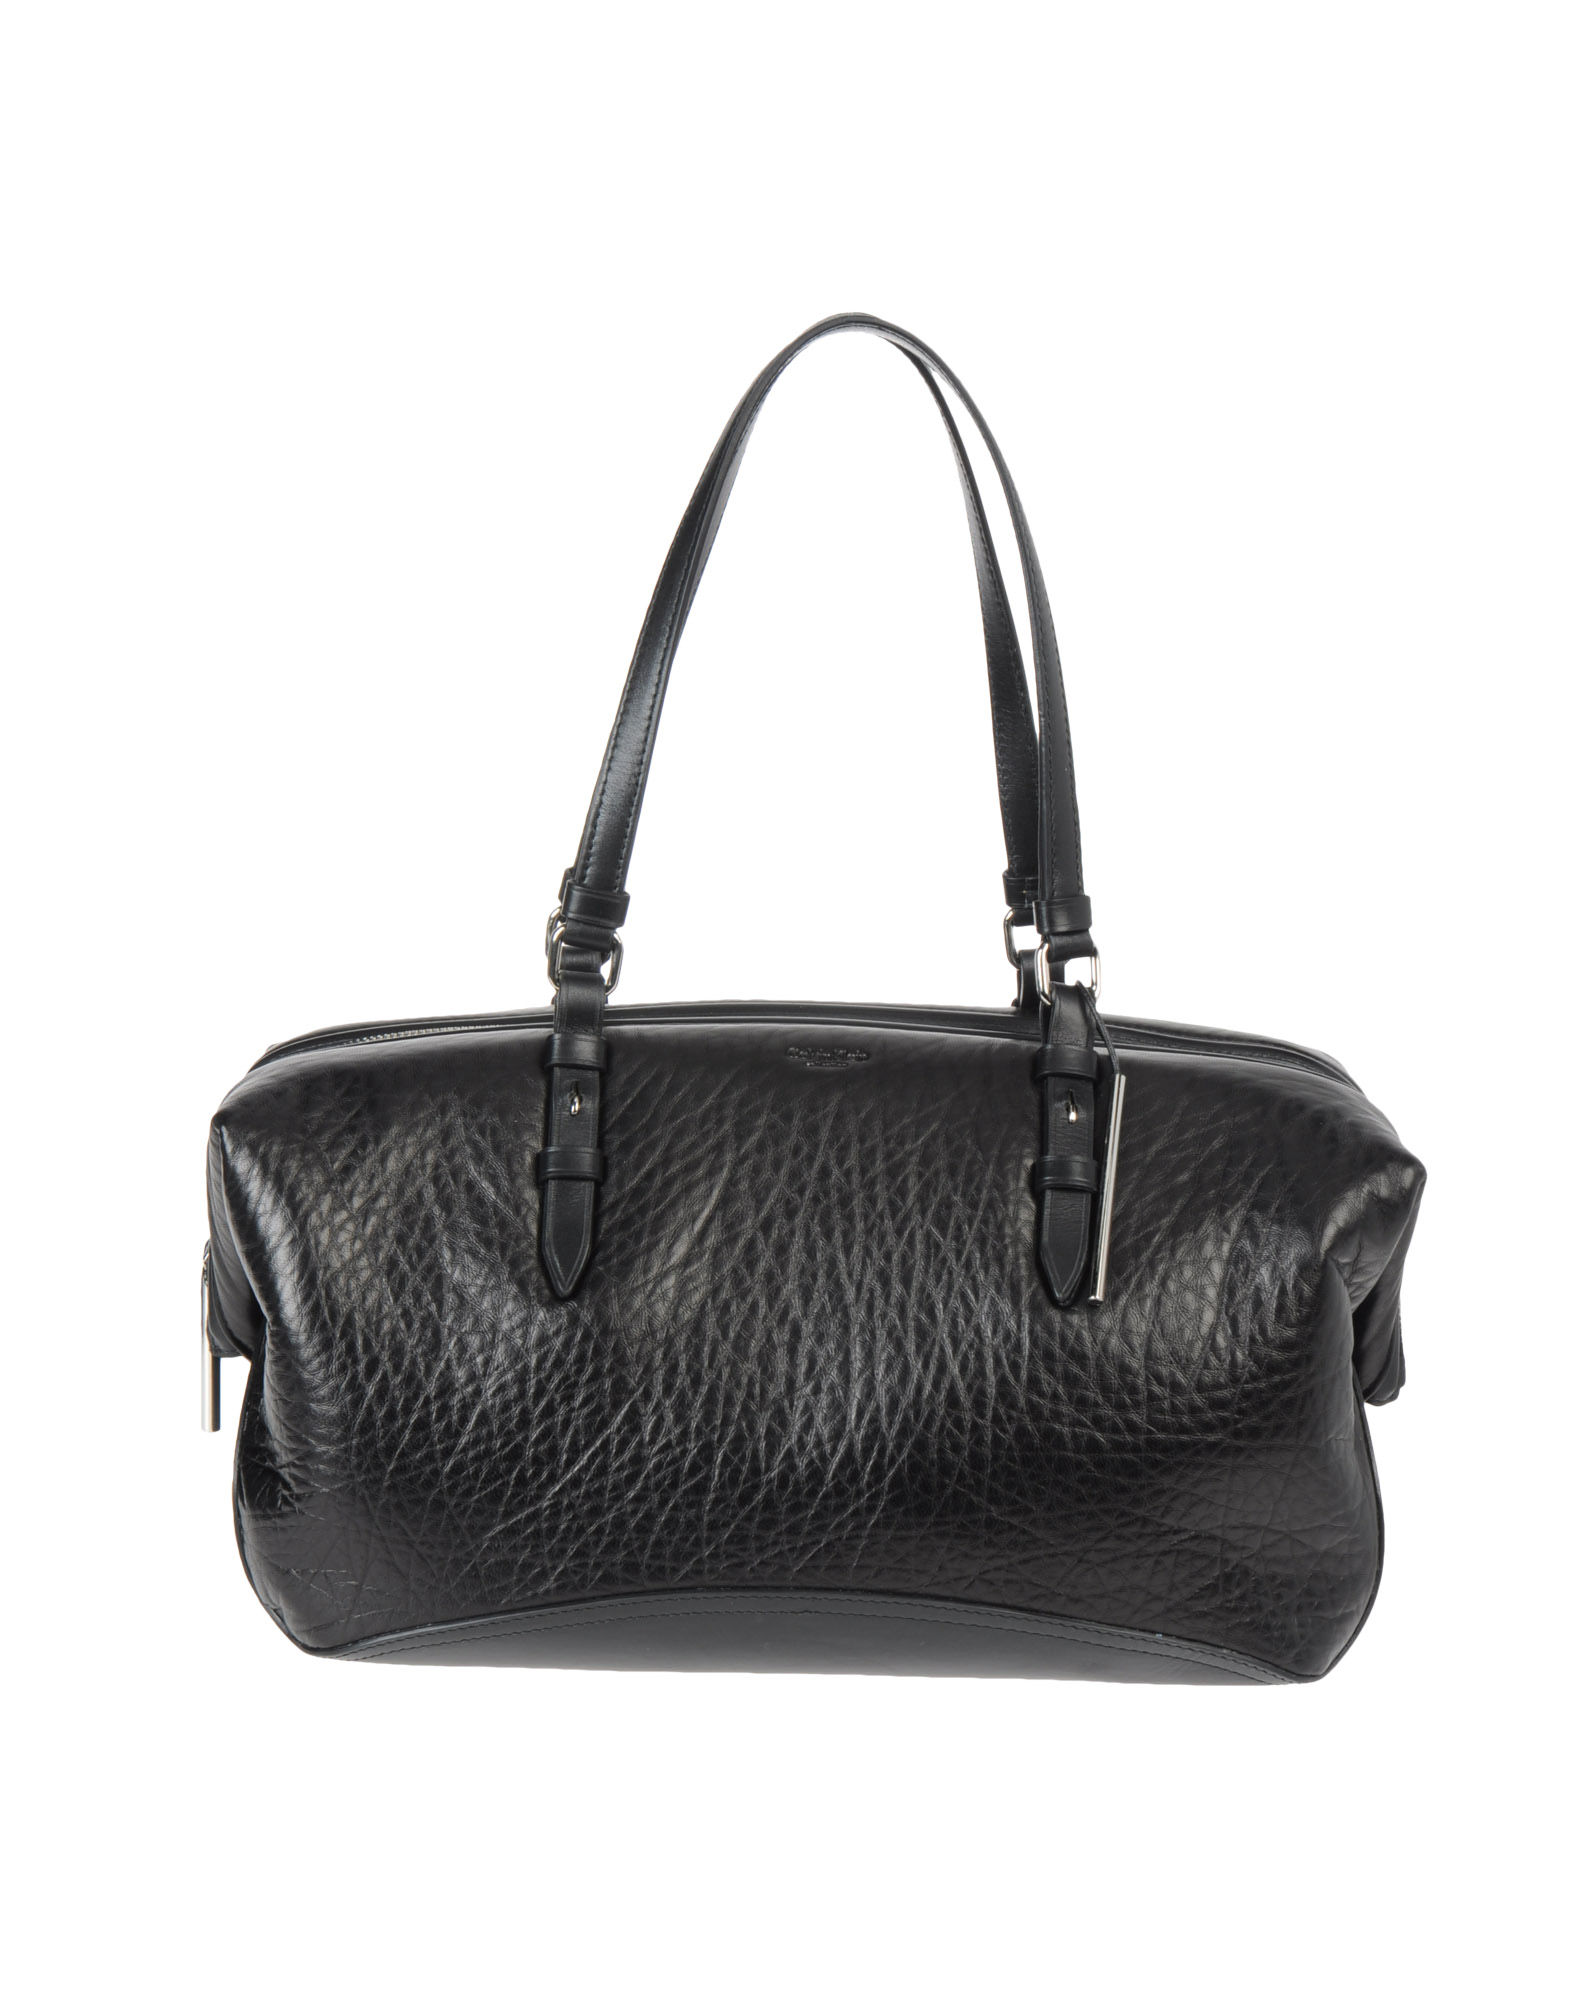 Calvin Klein Large Leather Bag in Black | Lyst